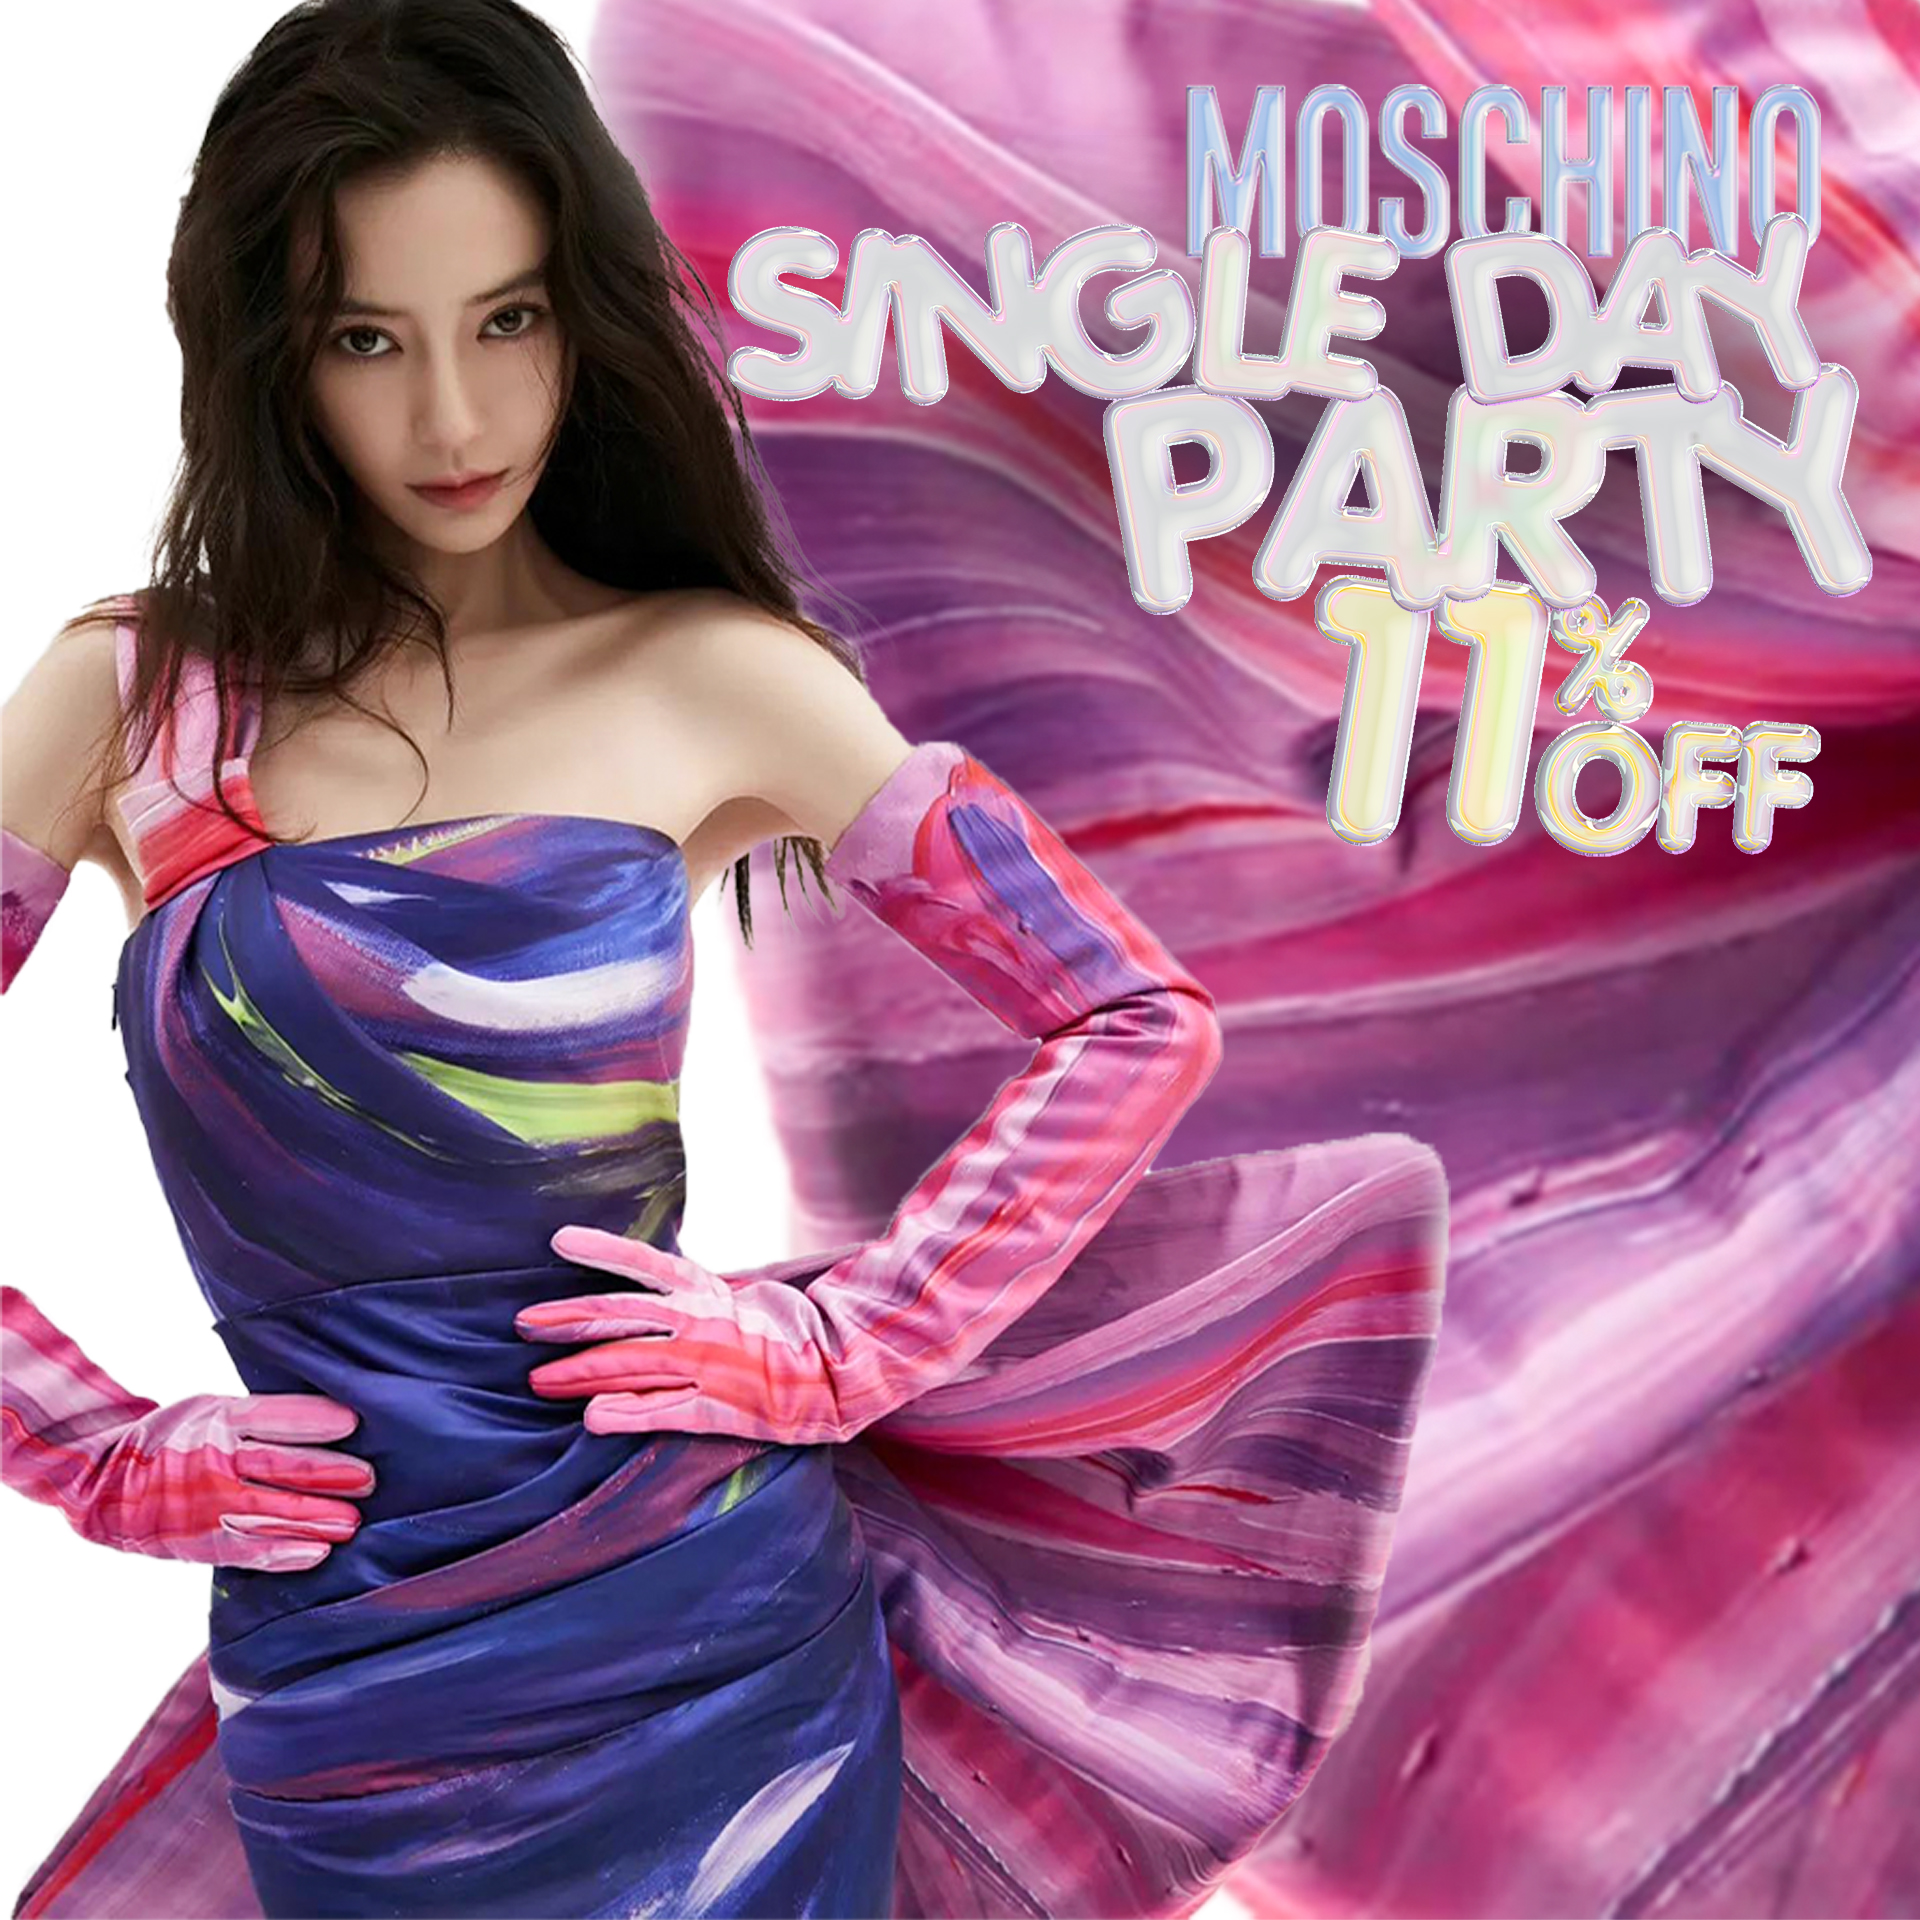 SPECIAL OFFER FROM MOSCHINO